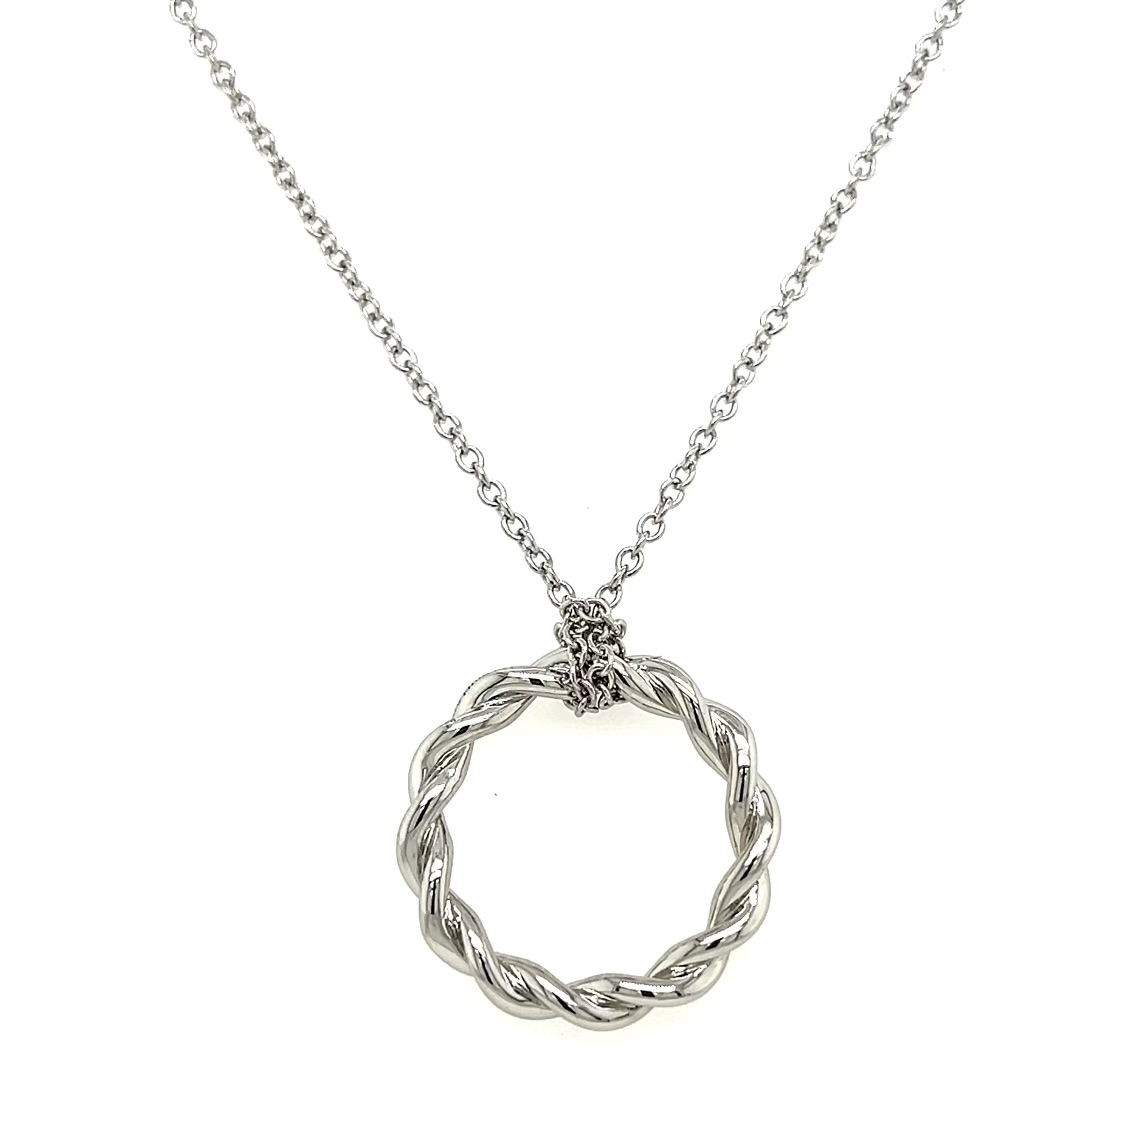 Need a last minute gift for mom?!😍 We got you! At a perfect price point of onky $199! 

640-01621

#itsaraywardring #sterlingsilver #diamonds #loveishere  #necklace #preferredjeweler #thinkrayward #ardmoreok #shoplocal